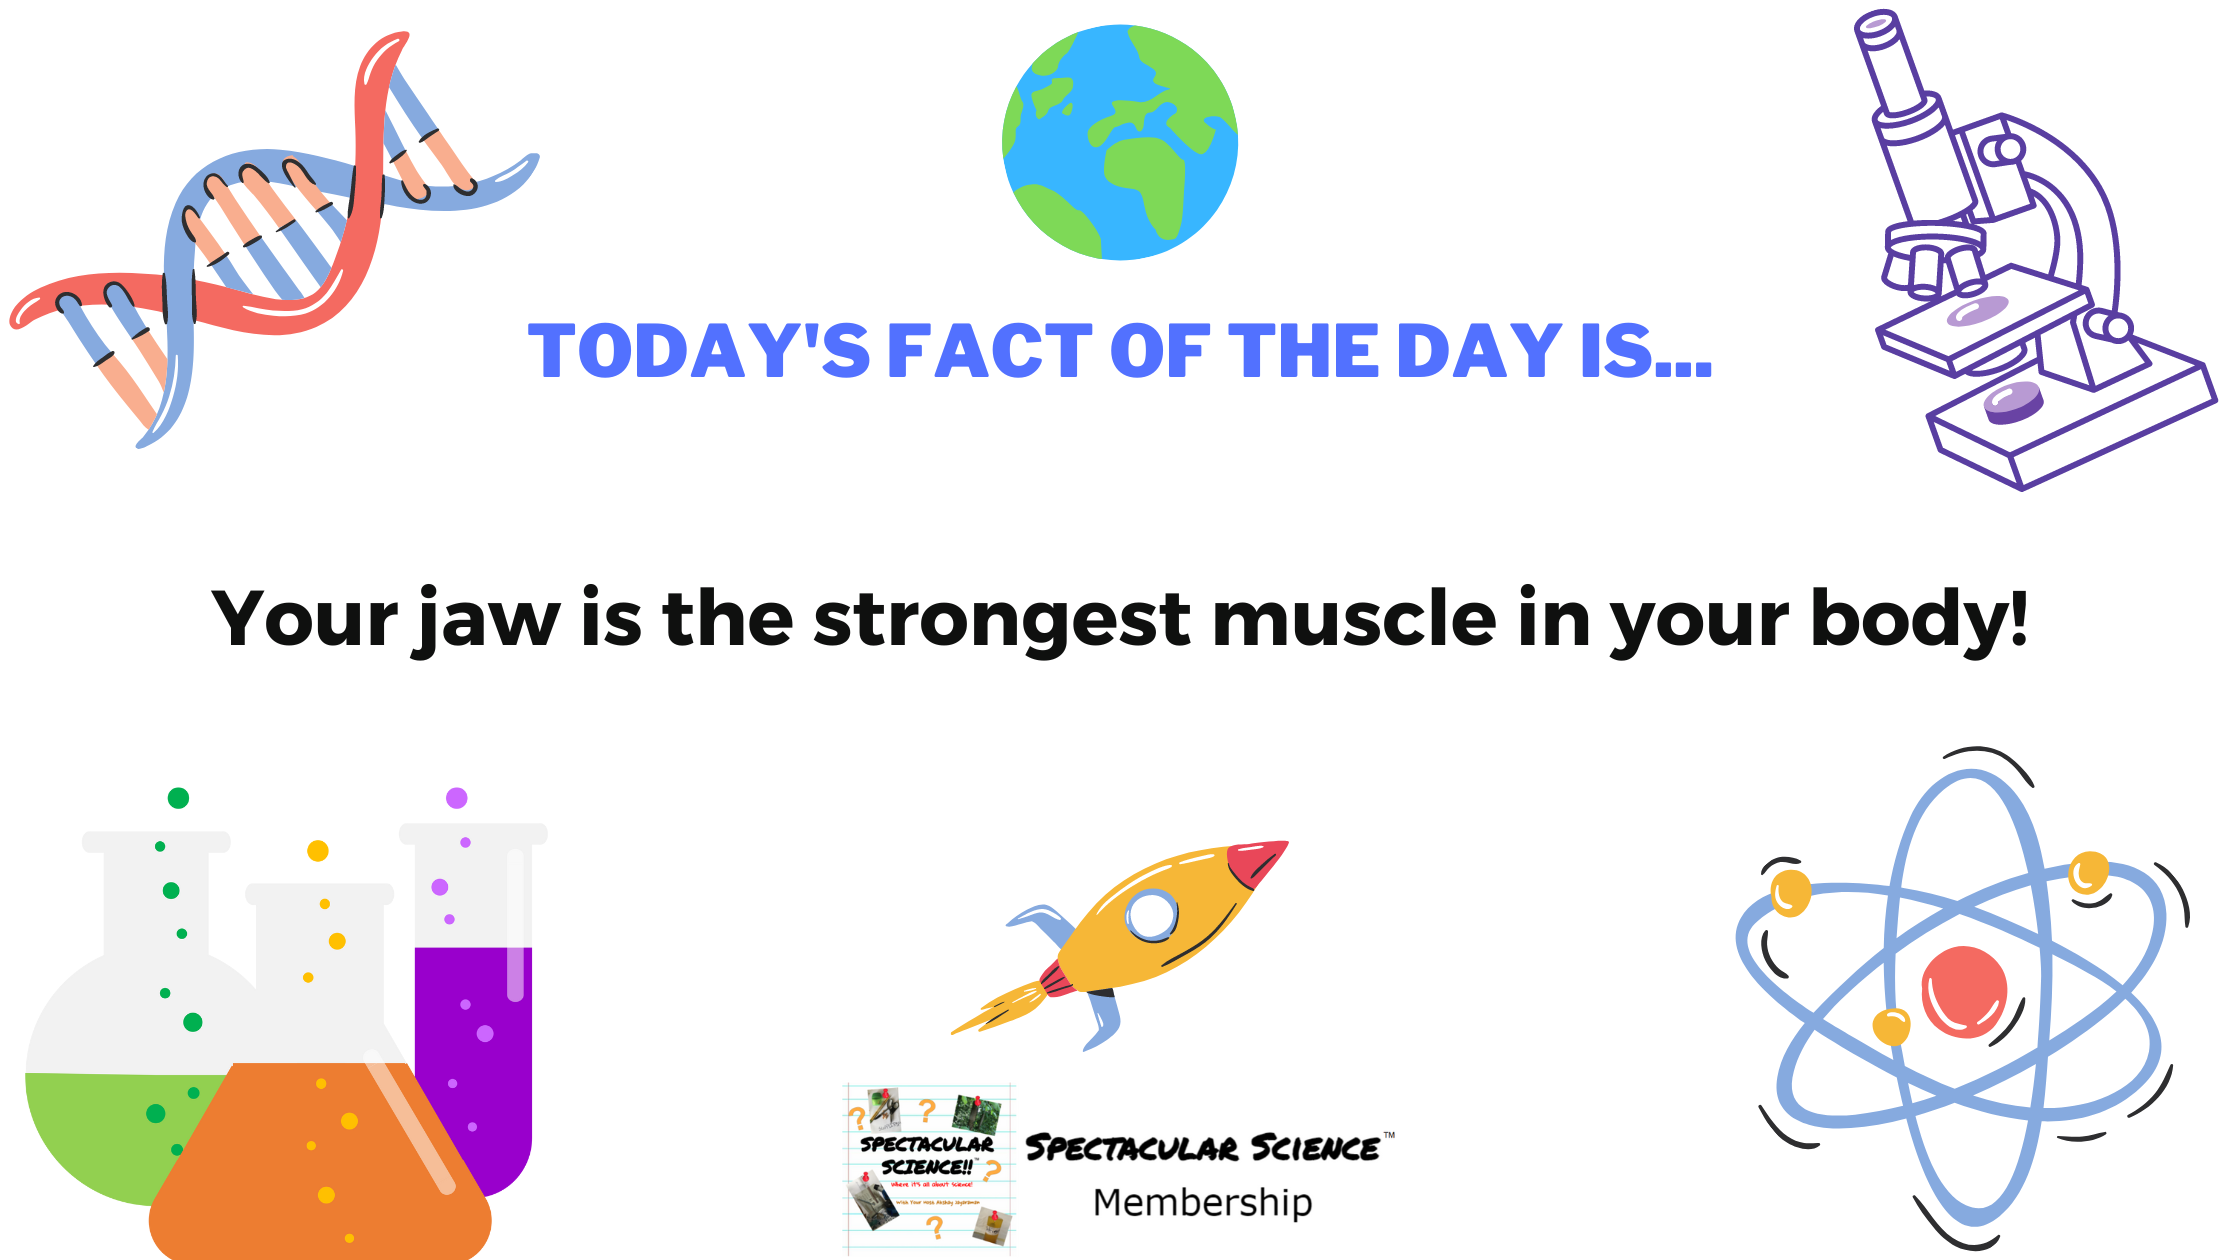 Fact of the Day Image July 22nd